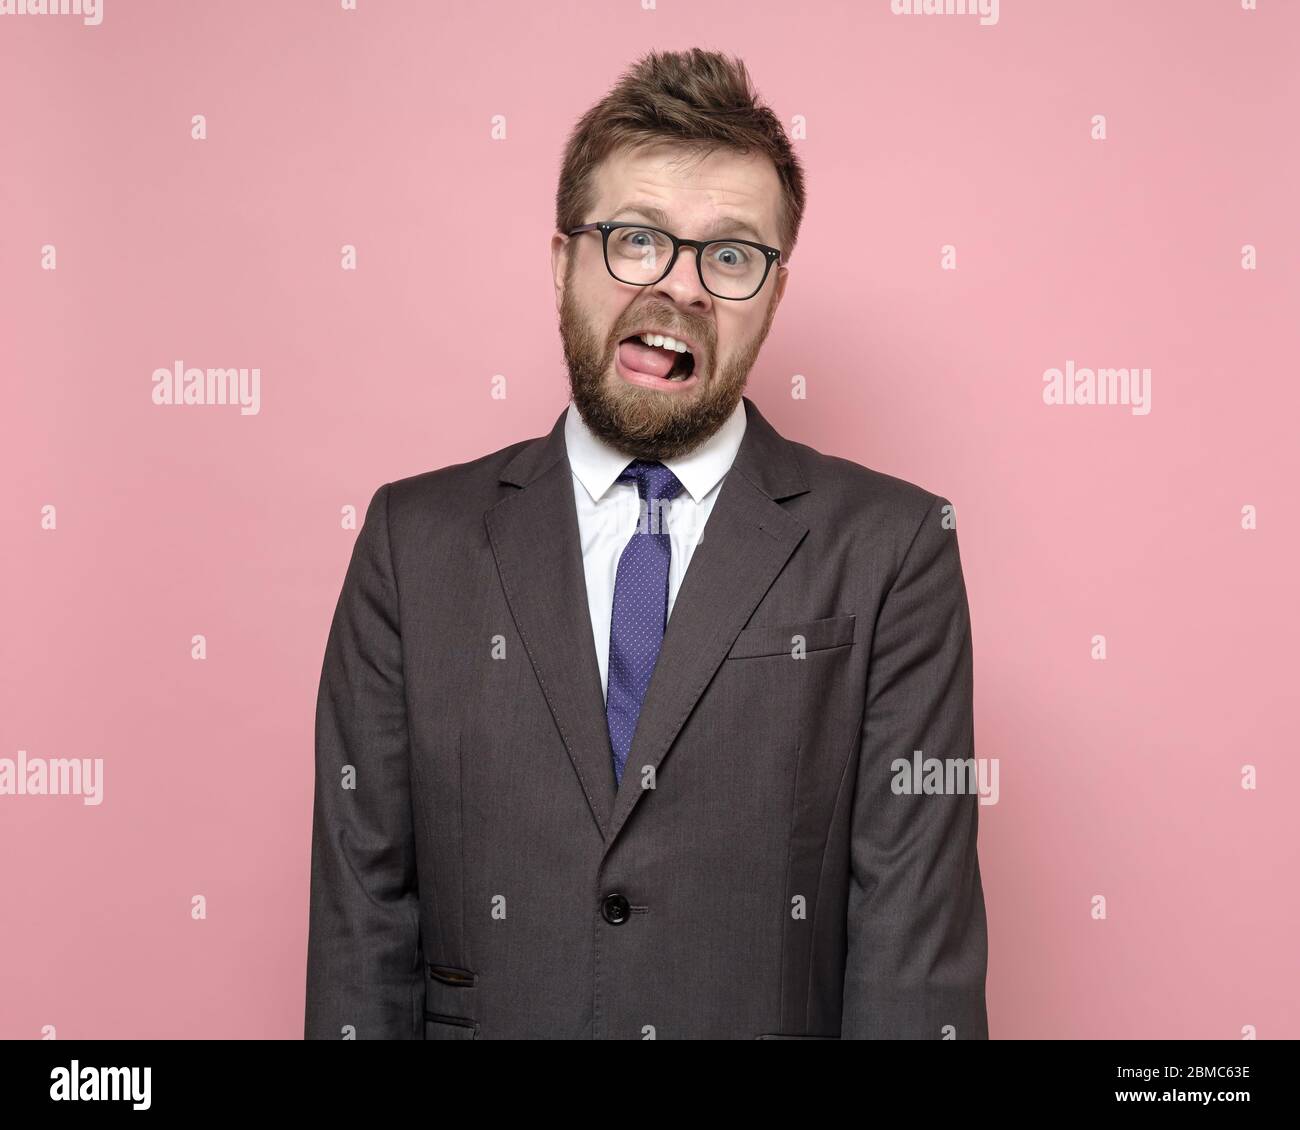 Crazy man in glasses and a suit with an open mouth and a strange expression on face. Concept of stress and mental health. Stock Photo